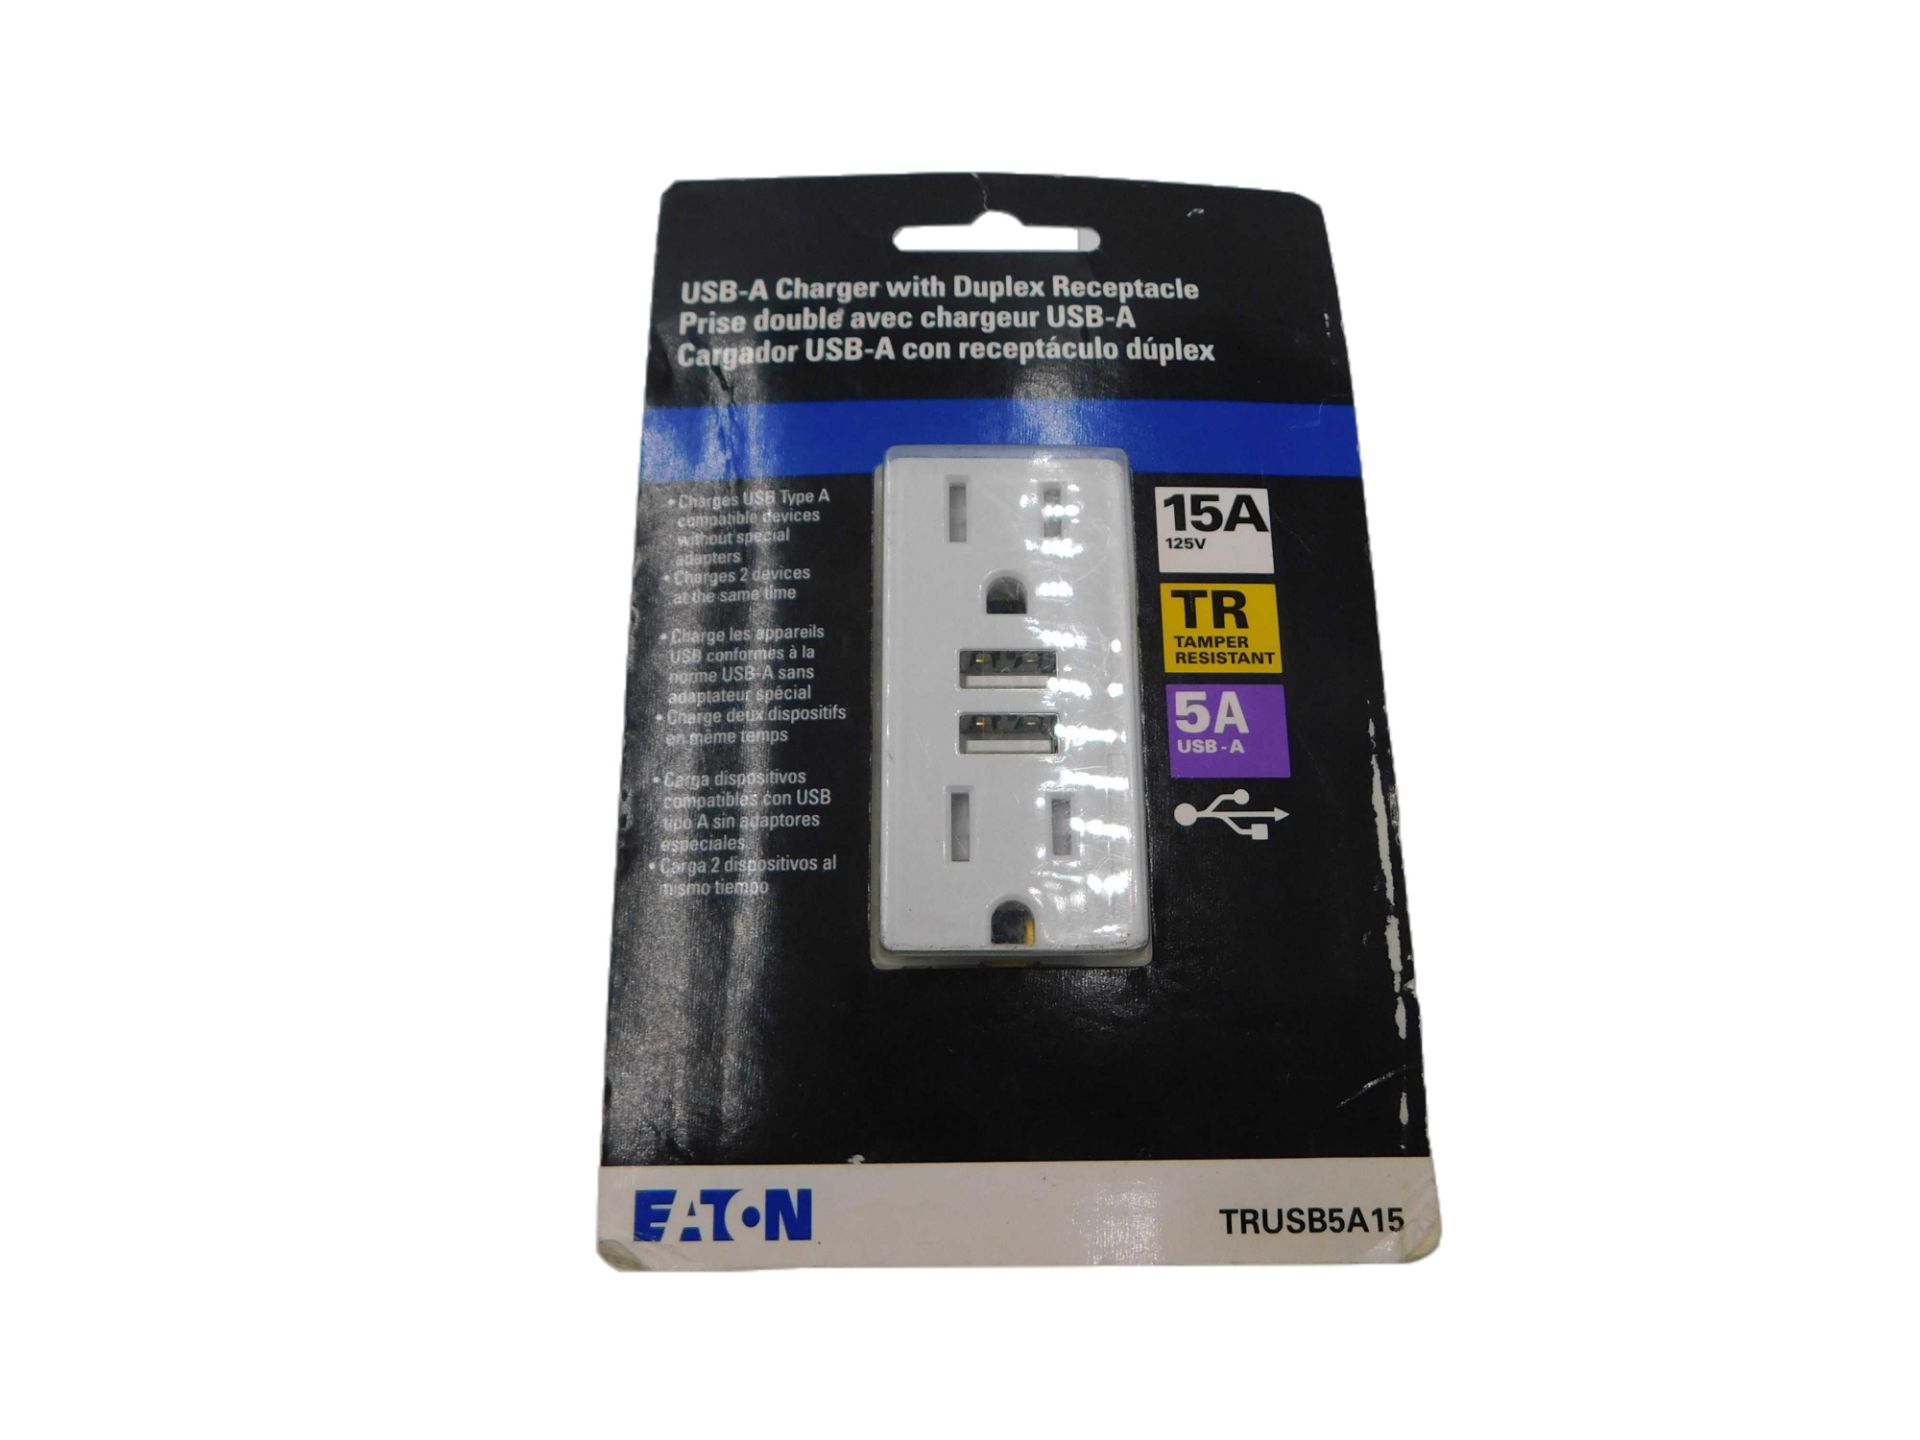 38x Eaton TRUSB5A15W-KB-LW Outlets Combination USB Charger/Duplex Receptacle 15A 125V White EA Tampe